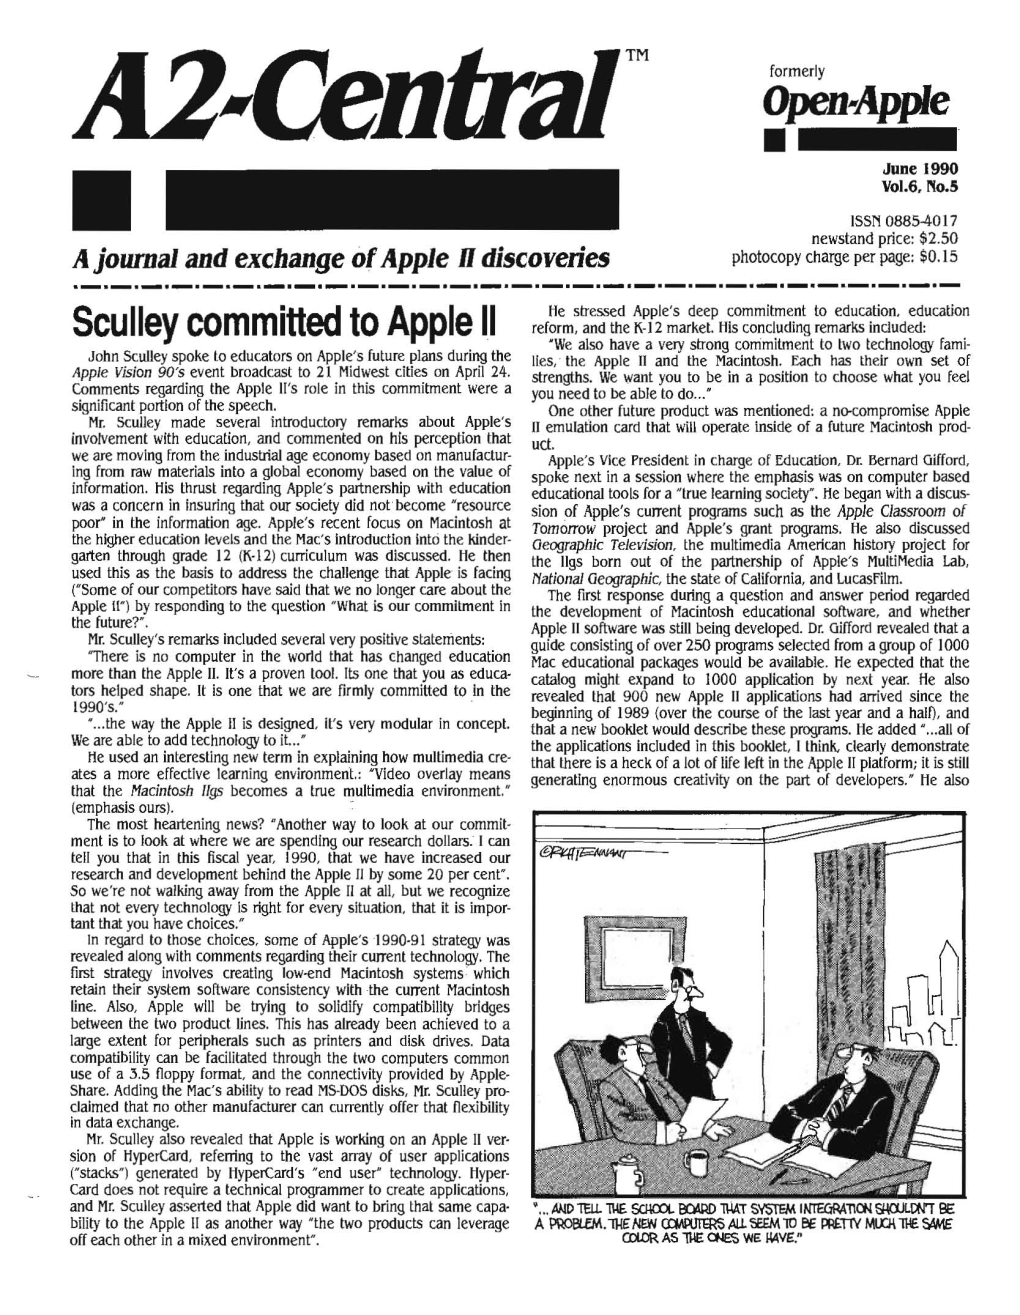 Open-Apple Sculley Committed to Apple II